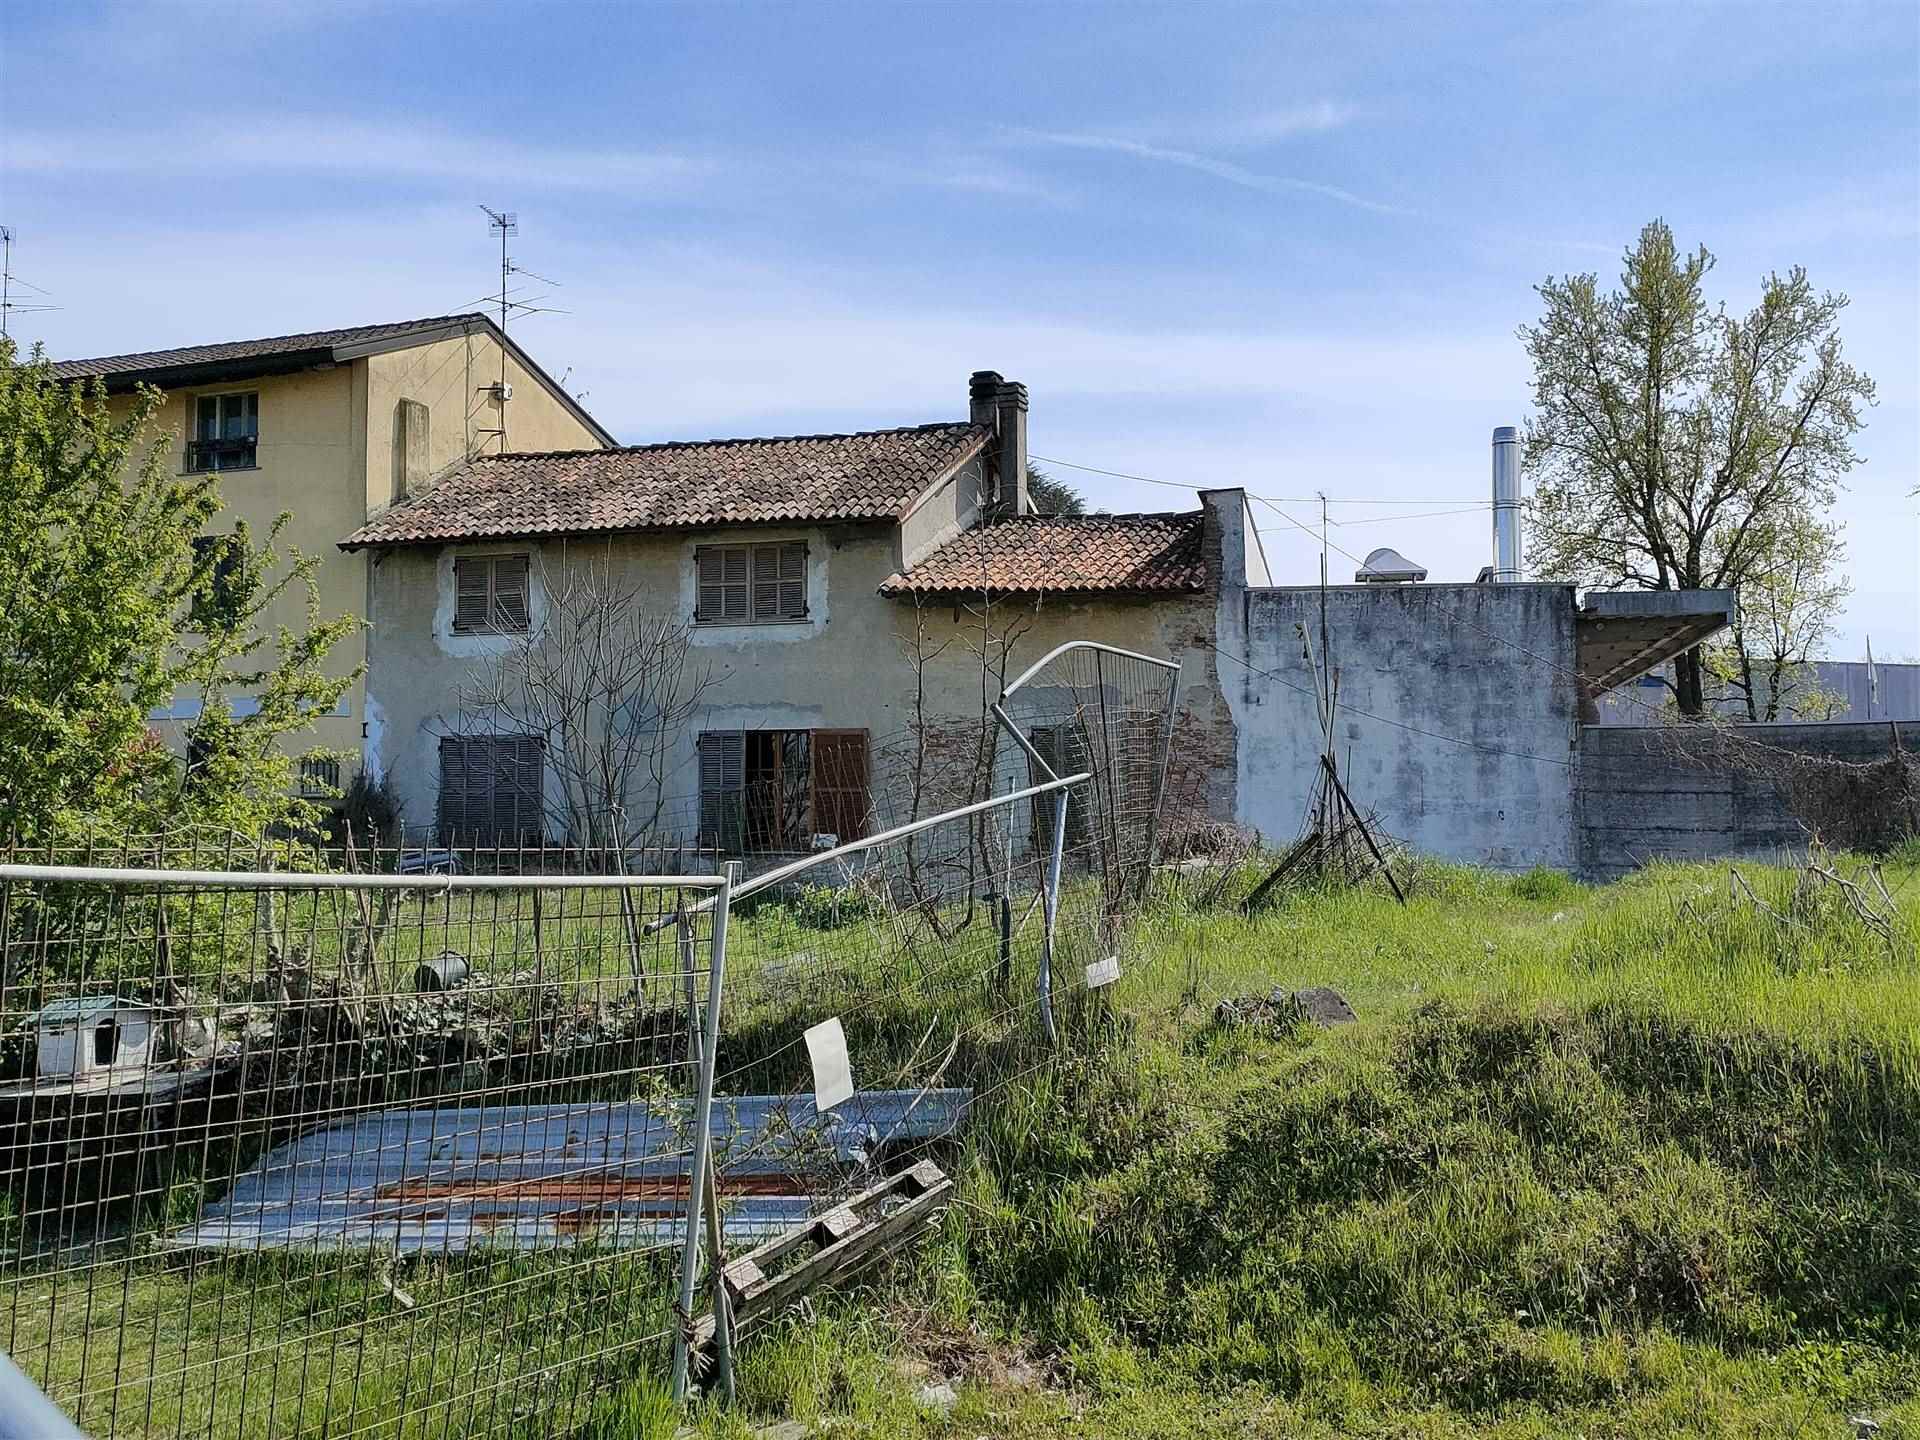 SEMICENTRO, LODI, Semi detached house for sale of 160 Sq. mt., Habitable, Heating Individual heating system, Energetic class: G, placed at Ground on 